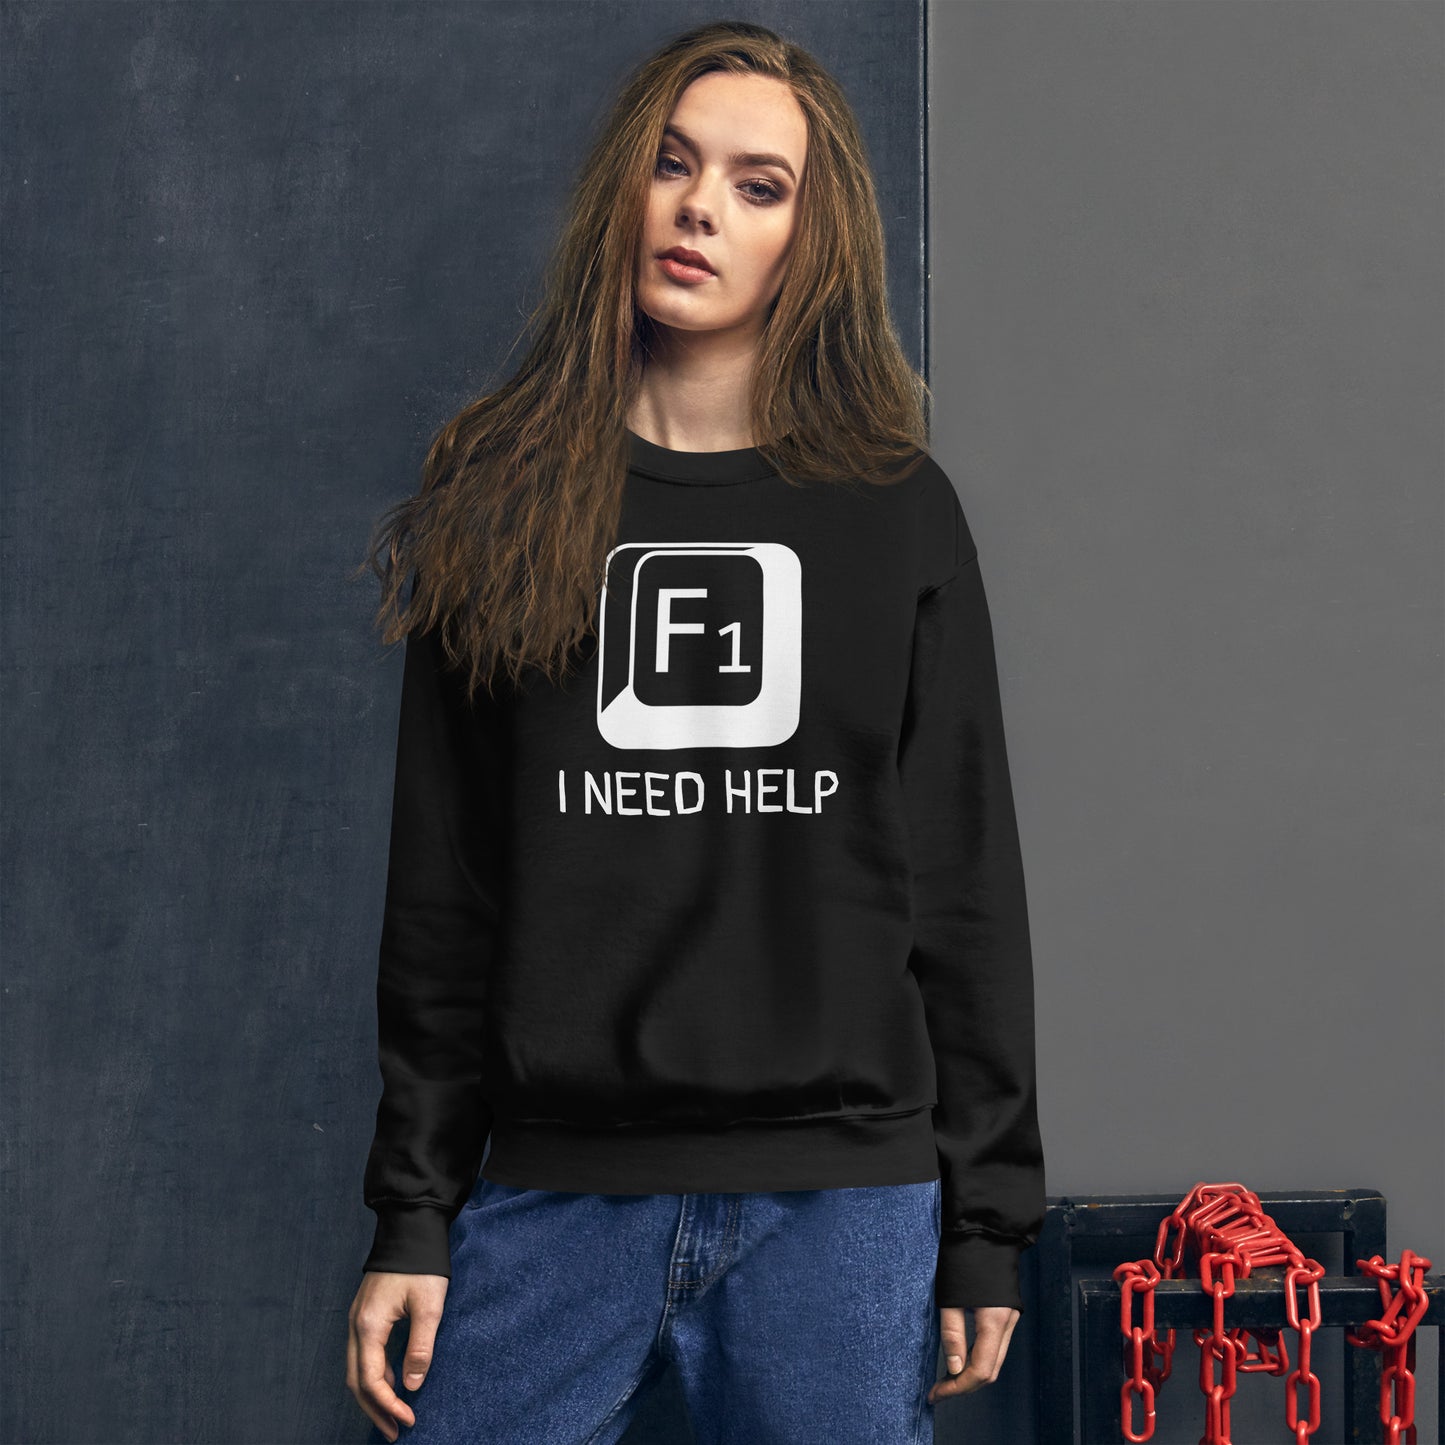 Women with black sweatshirt and a picture of F1 key with text "I need help"